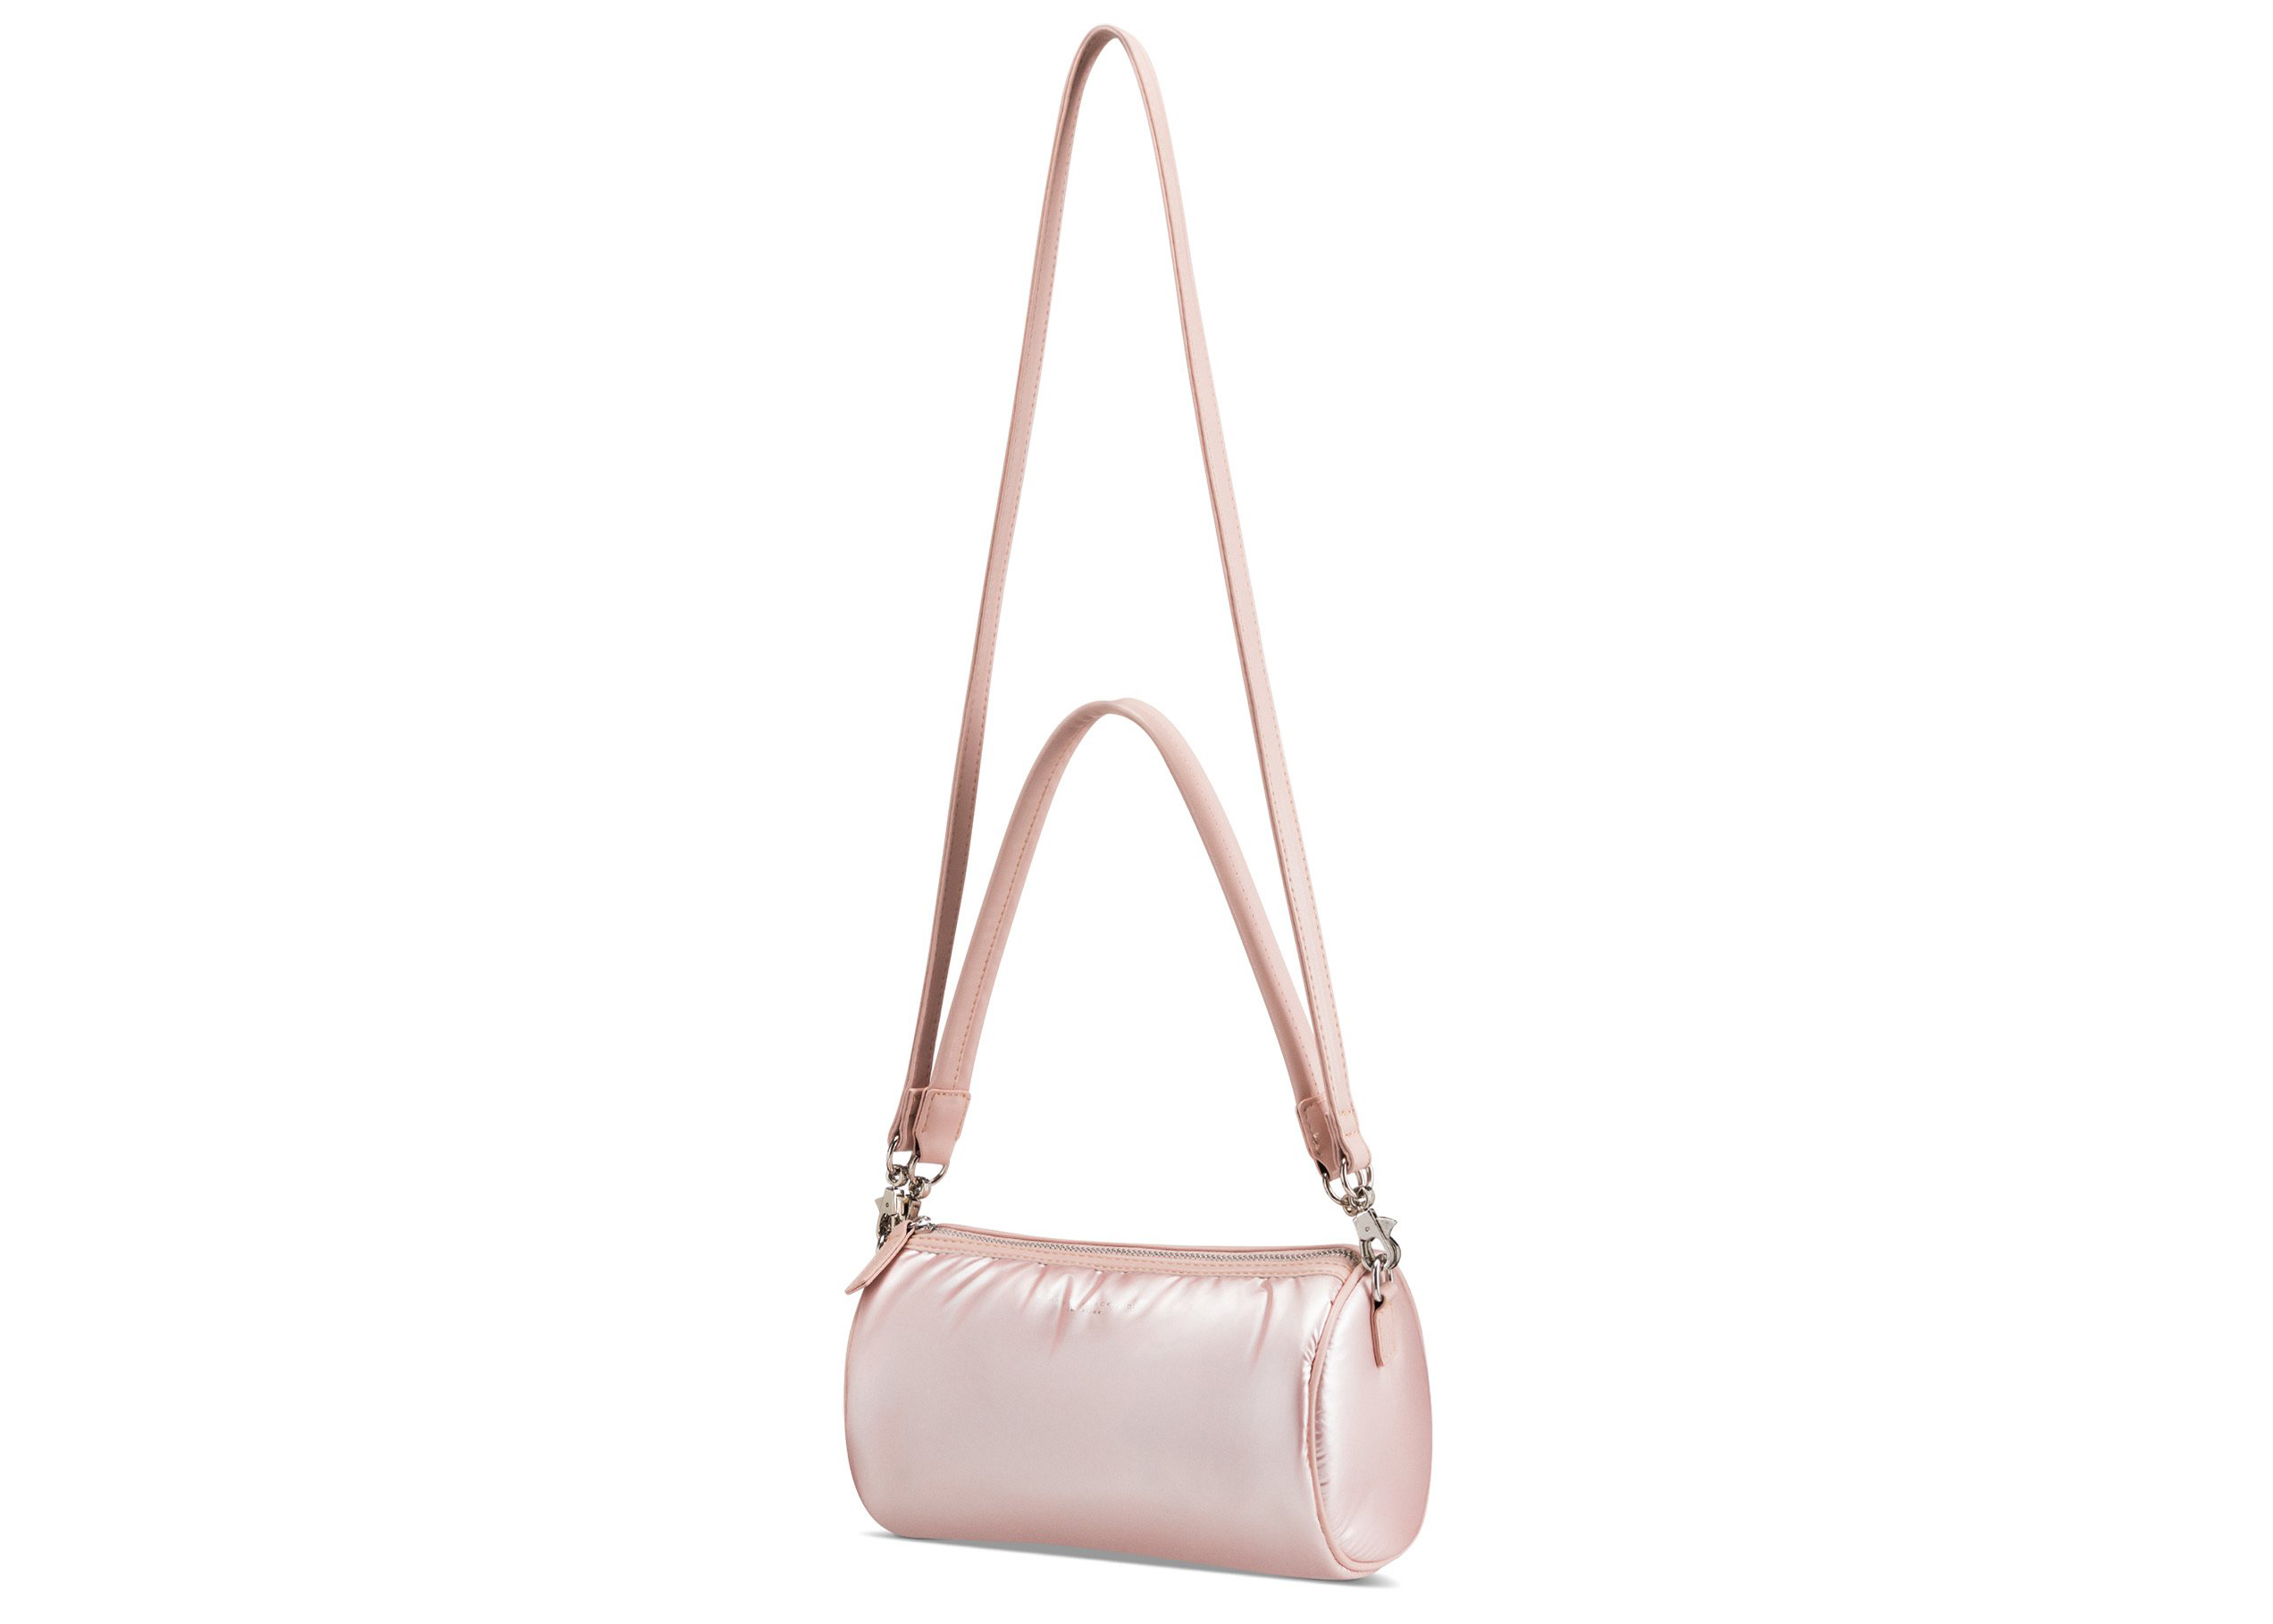 Brandon Blackwood Bianca Puffer Tote Pink in Nylon with Silver 